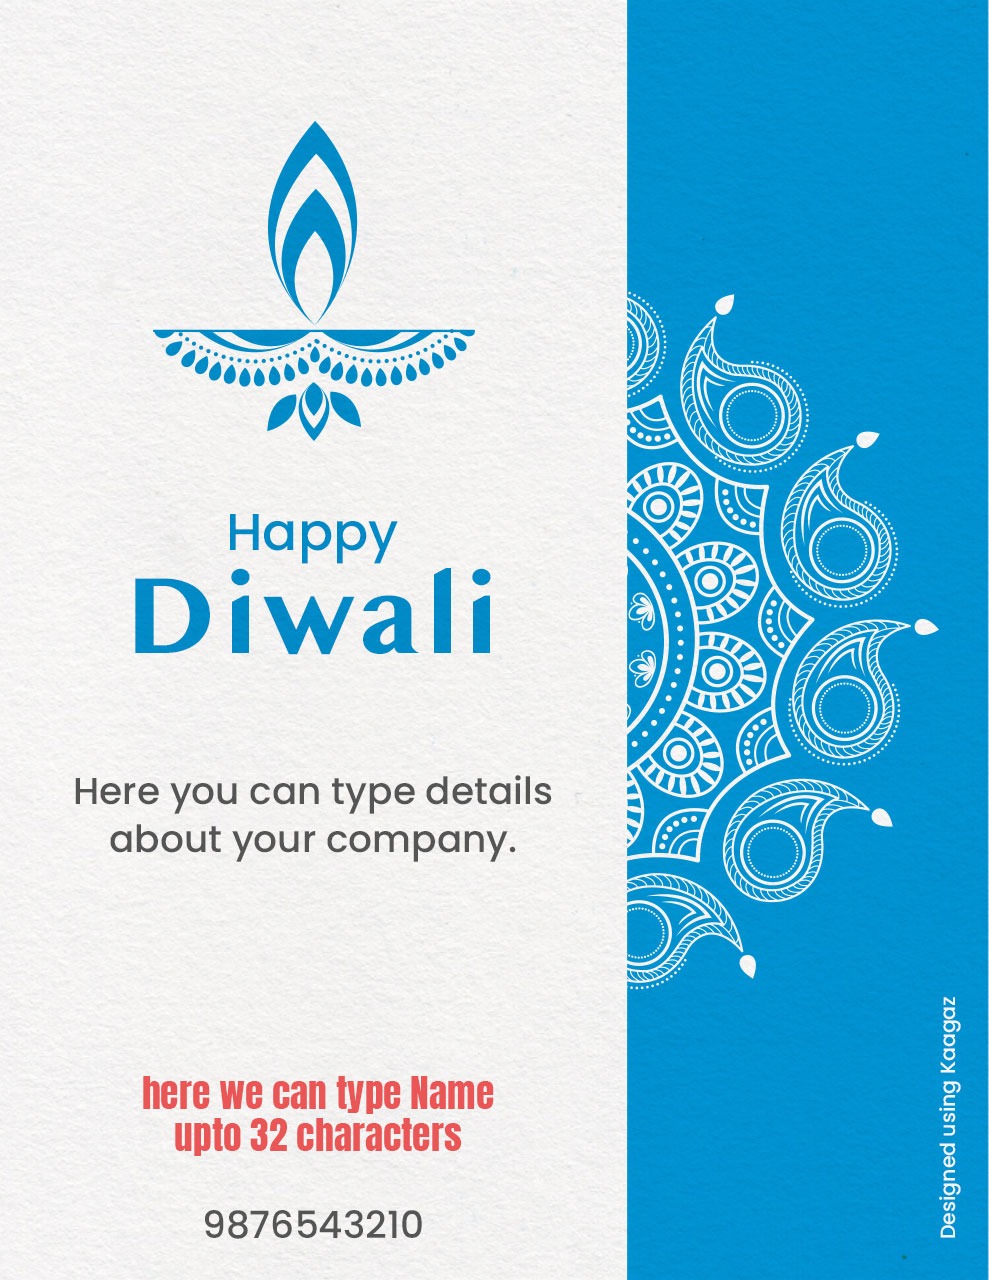 Wish you & your family a very happy Diwali!